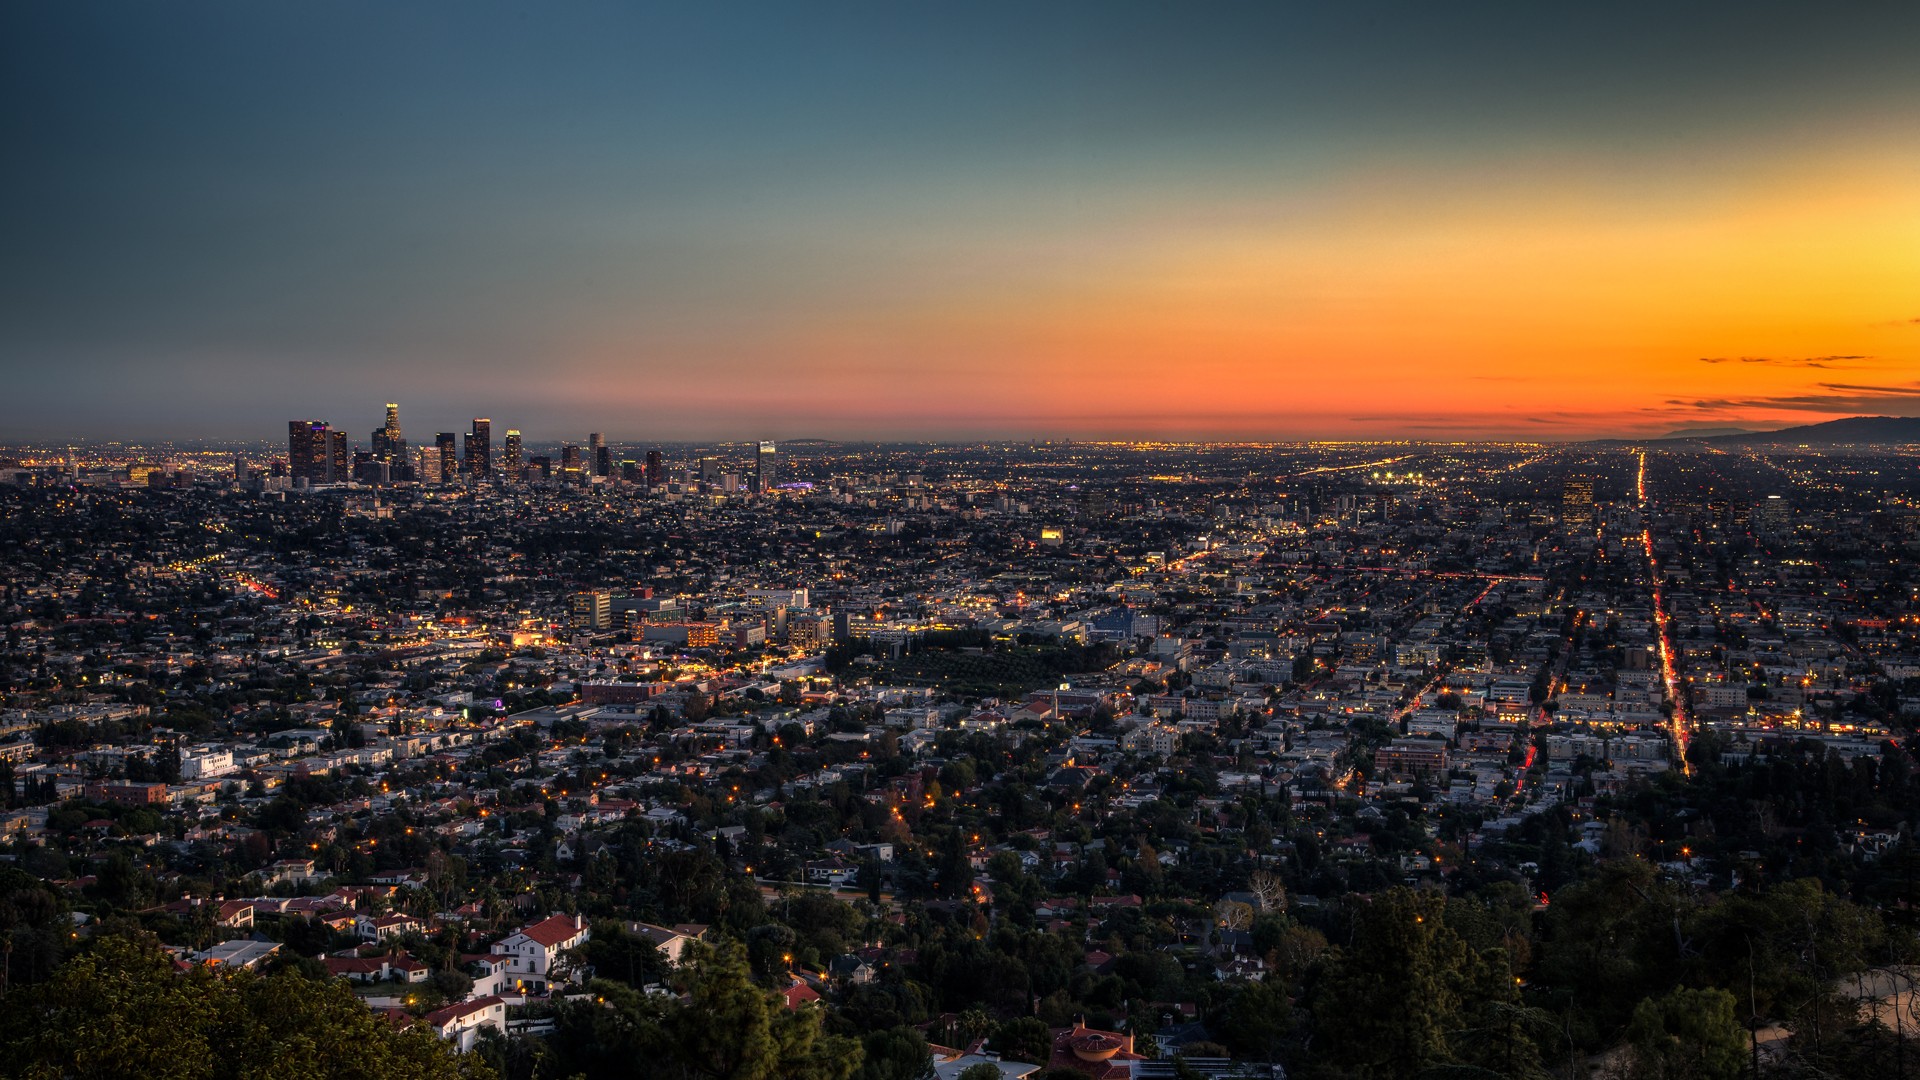 General 1920x1080 Los Angeles aerial view city cityscape sunset orange sky USA